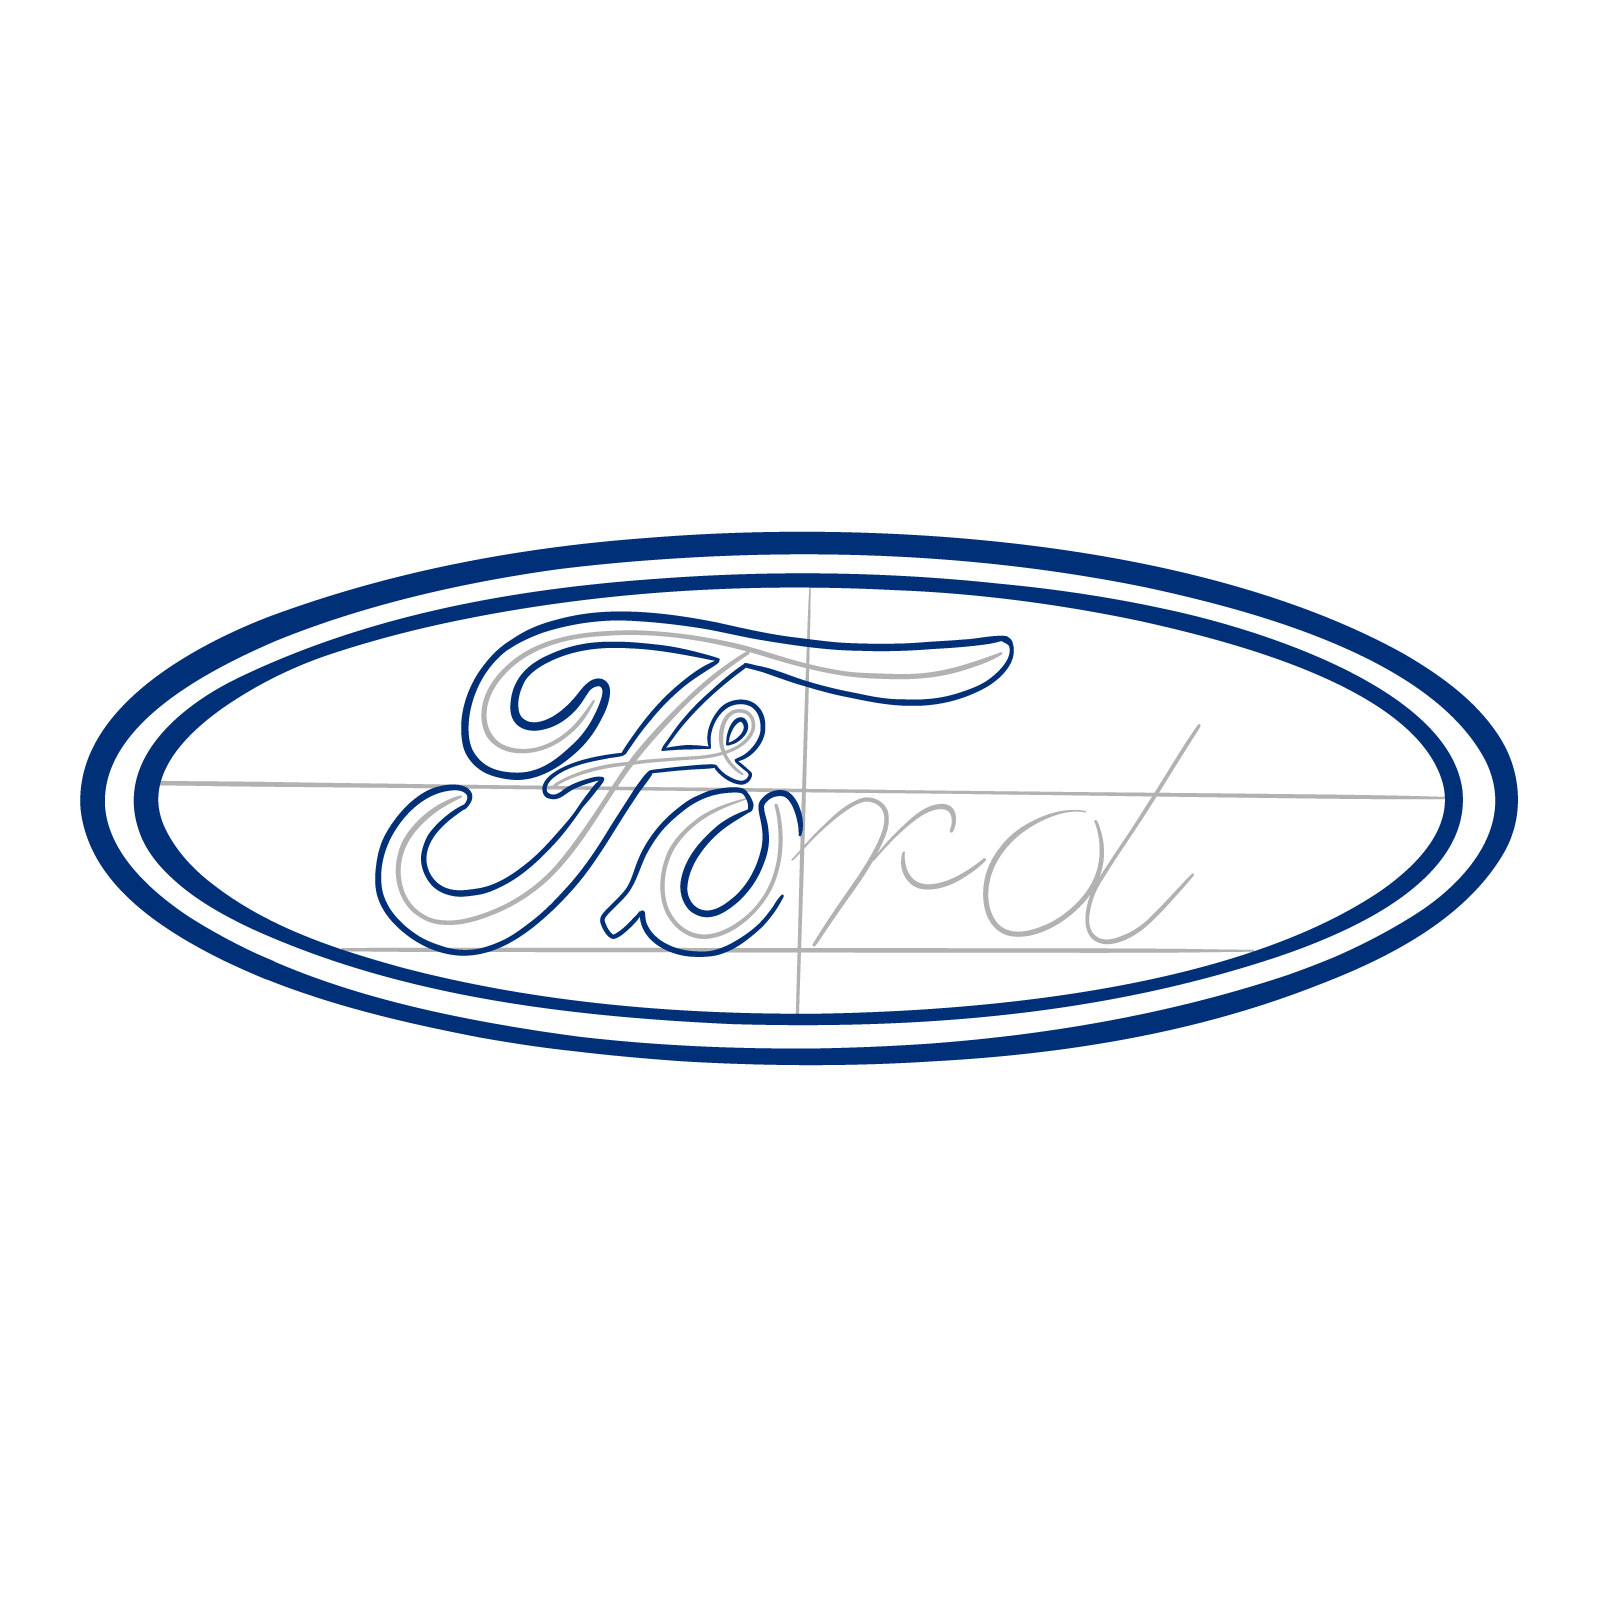 How to draw the Ford logo - step 08